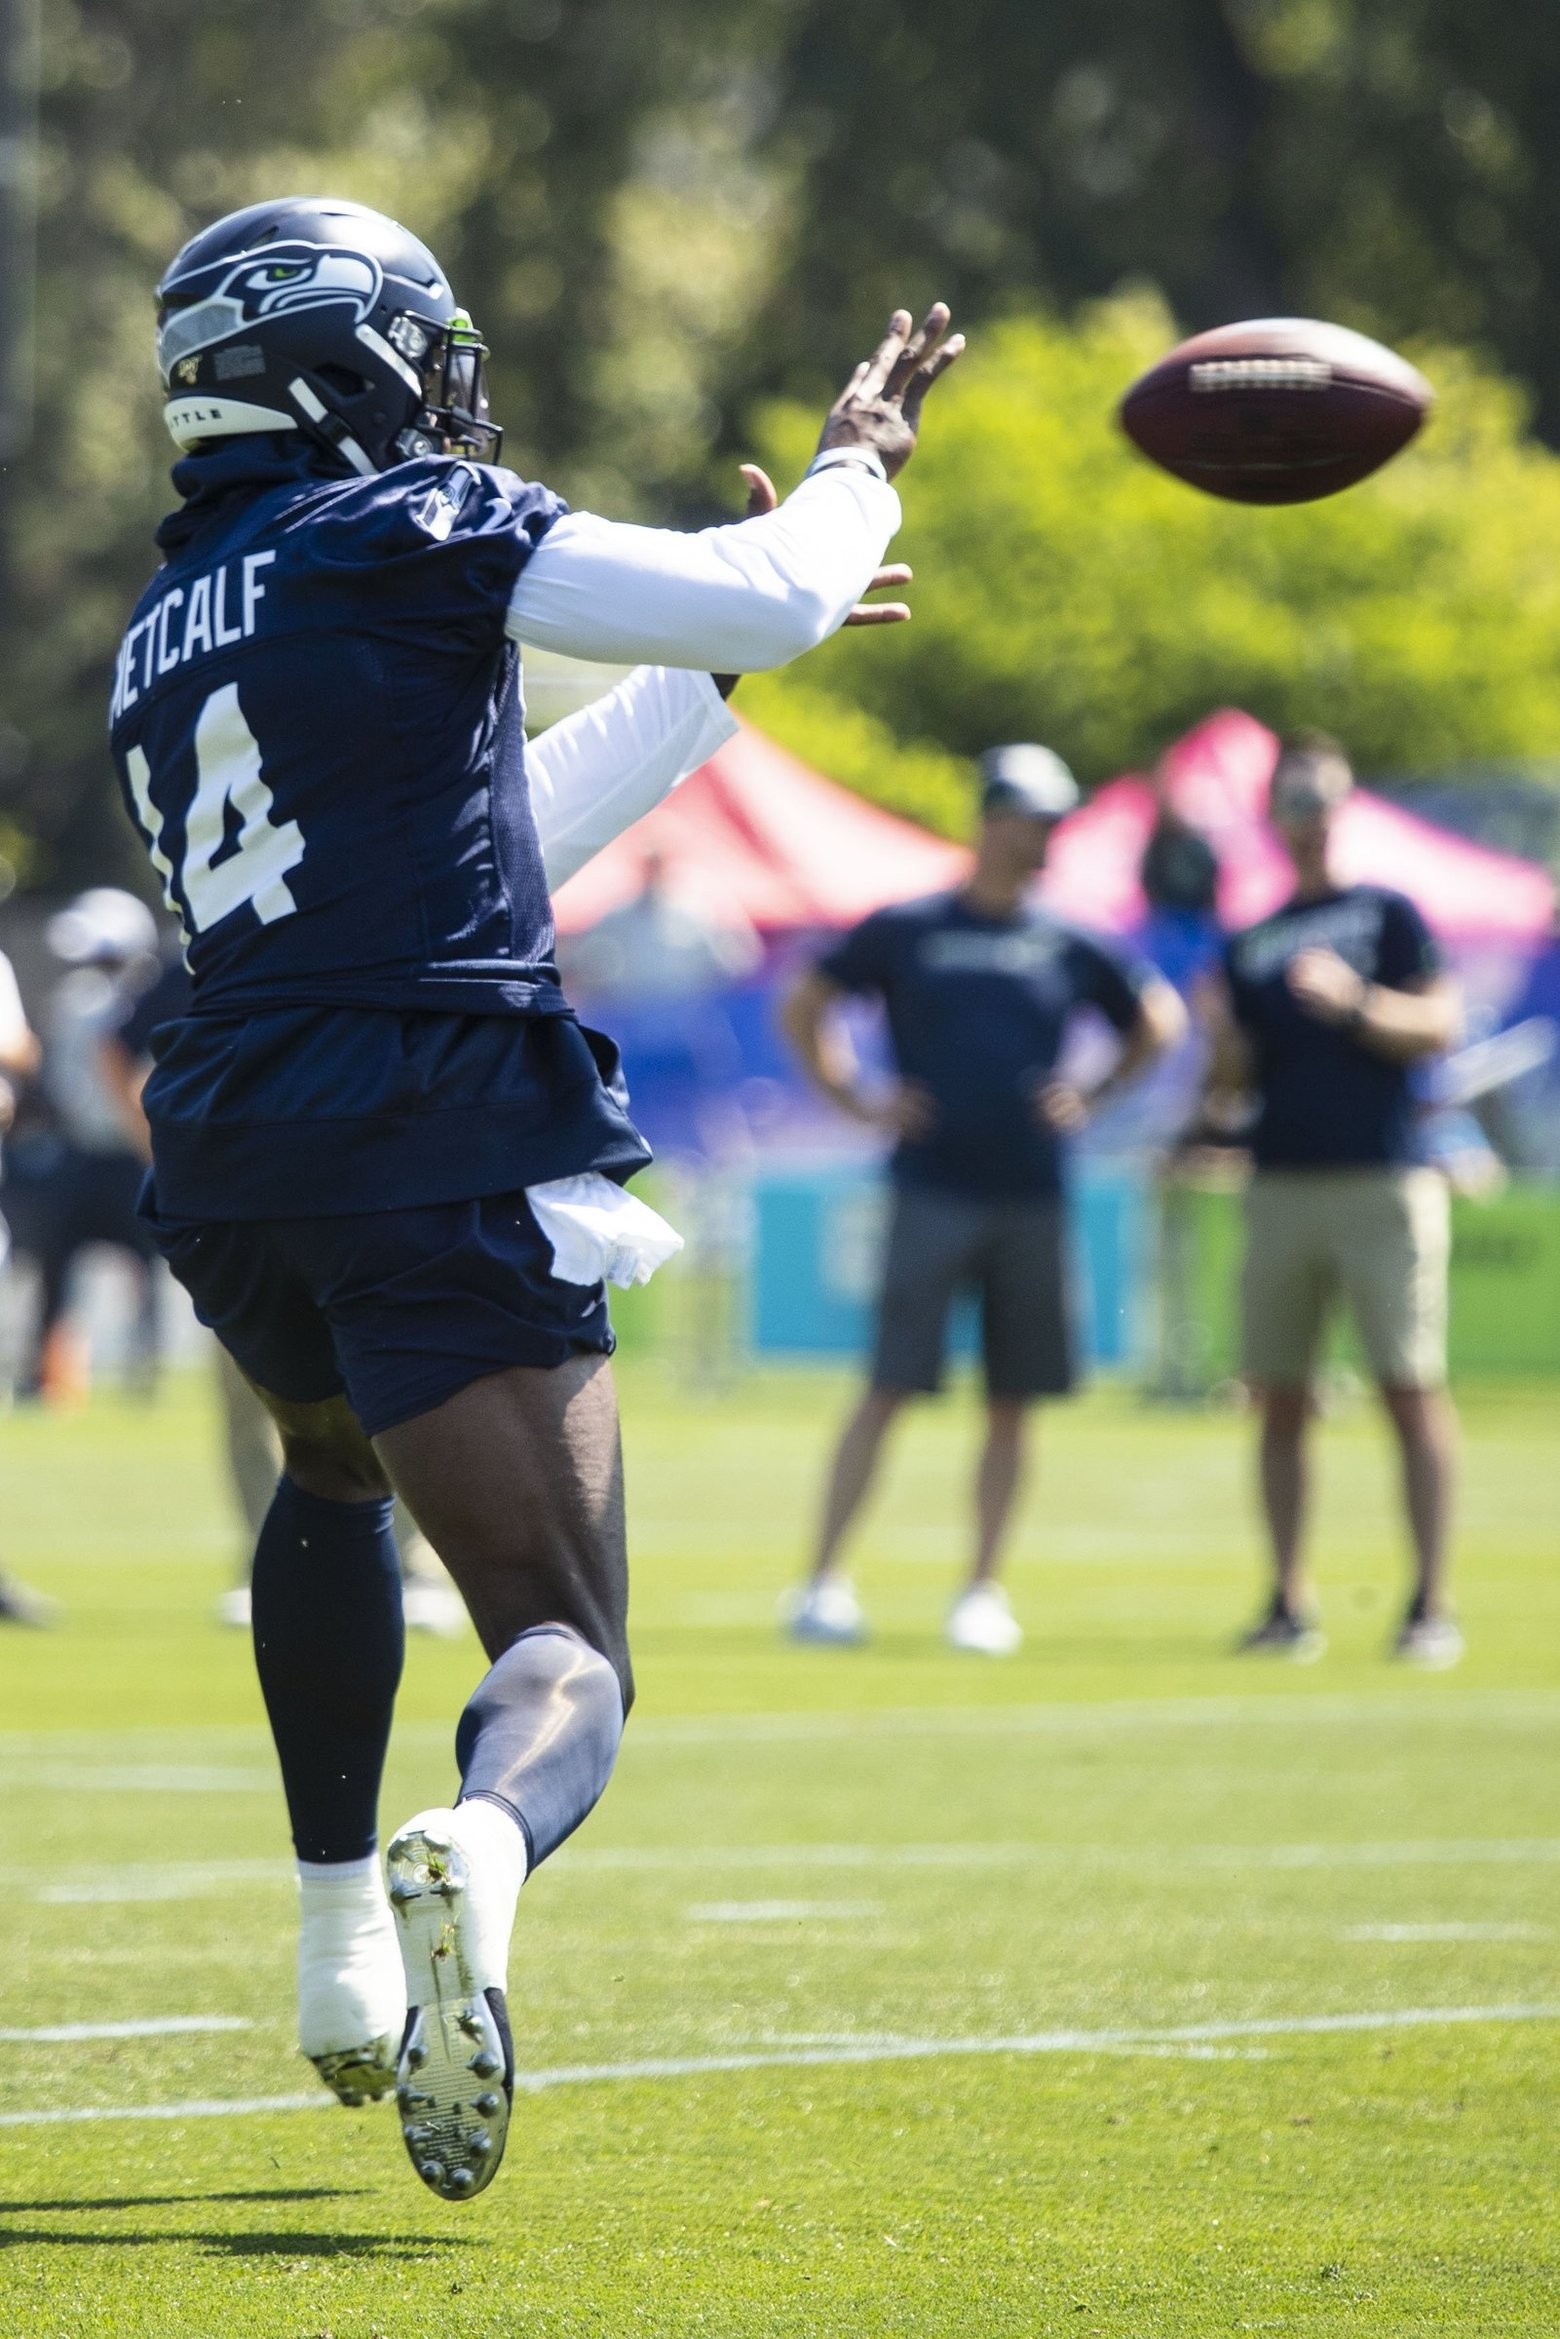 Seahawks training camp Day 10: Receiver DK Metcalf shows he’s ready to